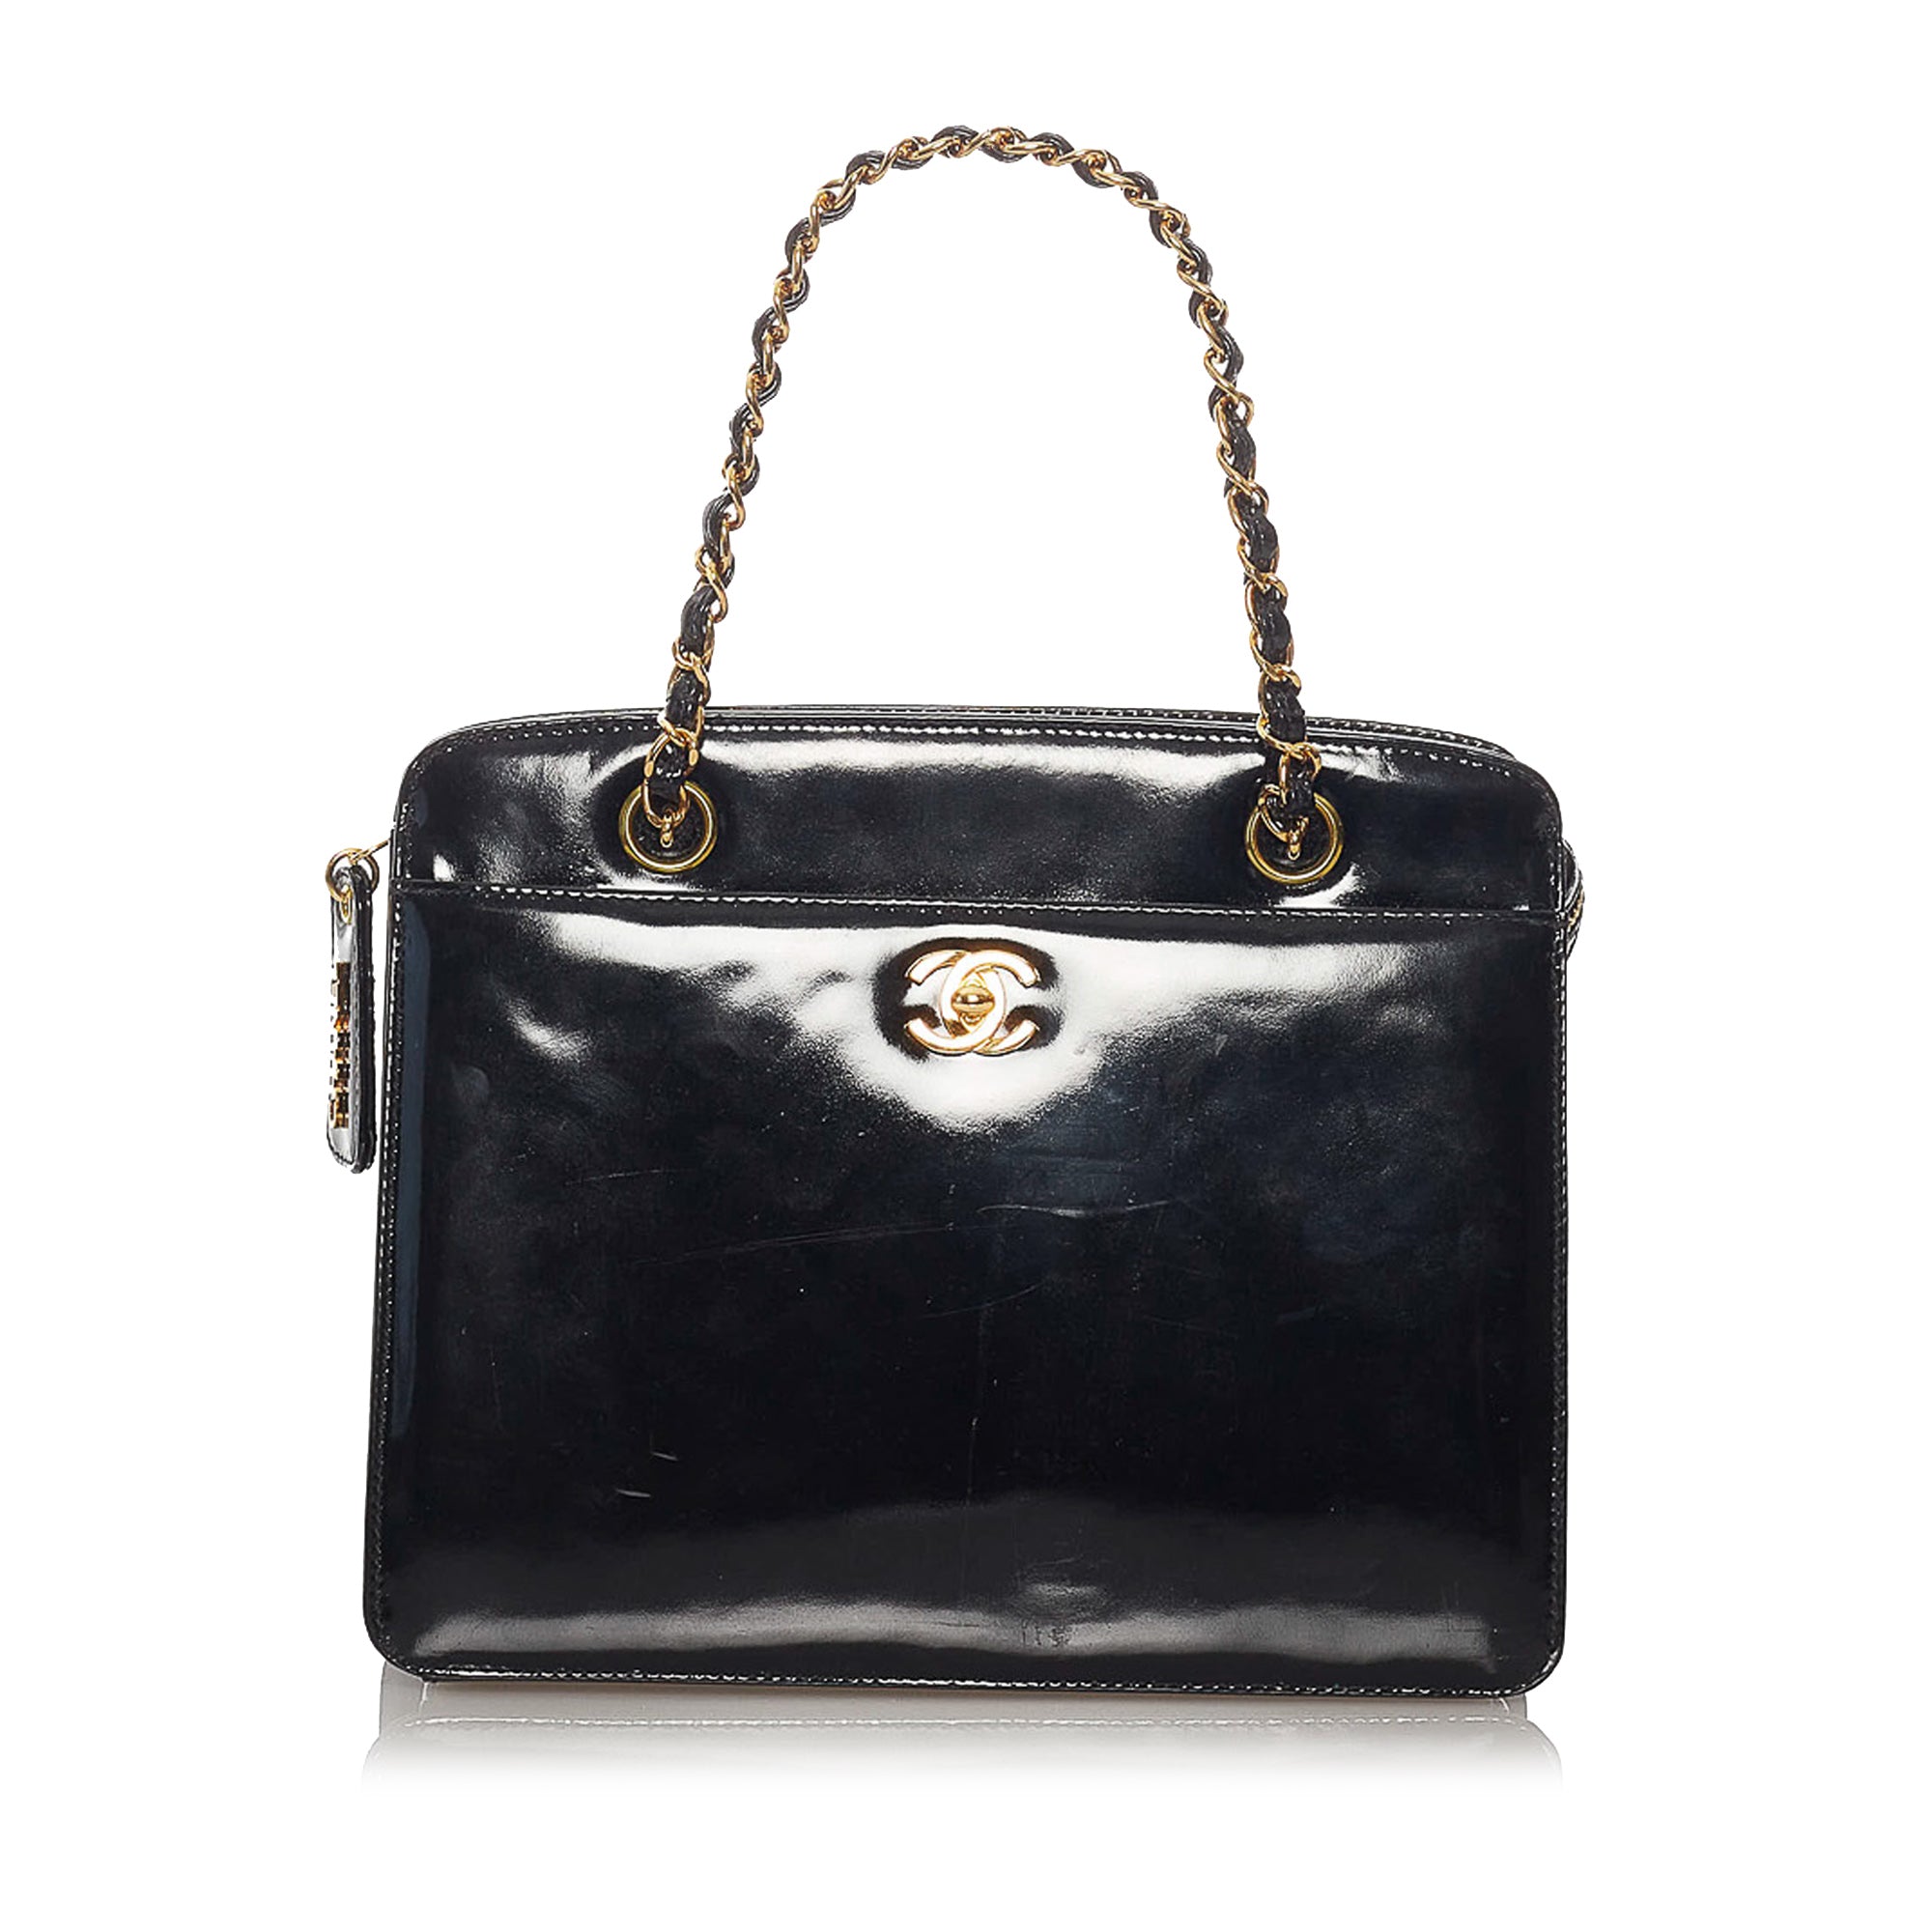 Chanel - Authenticated Gabrielle Handbag - Leather Black Plain for Women, Very Good Condition